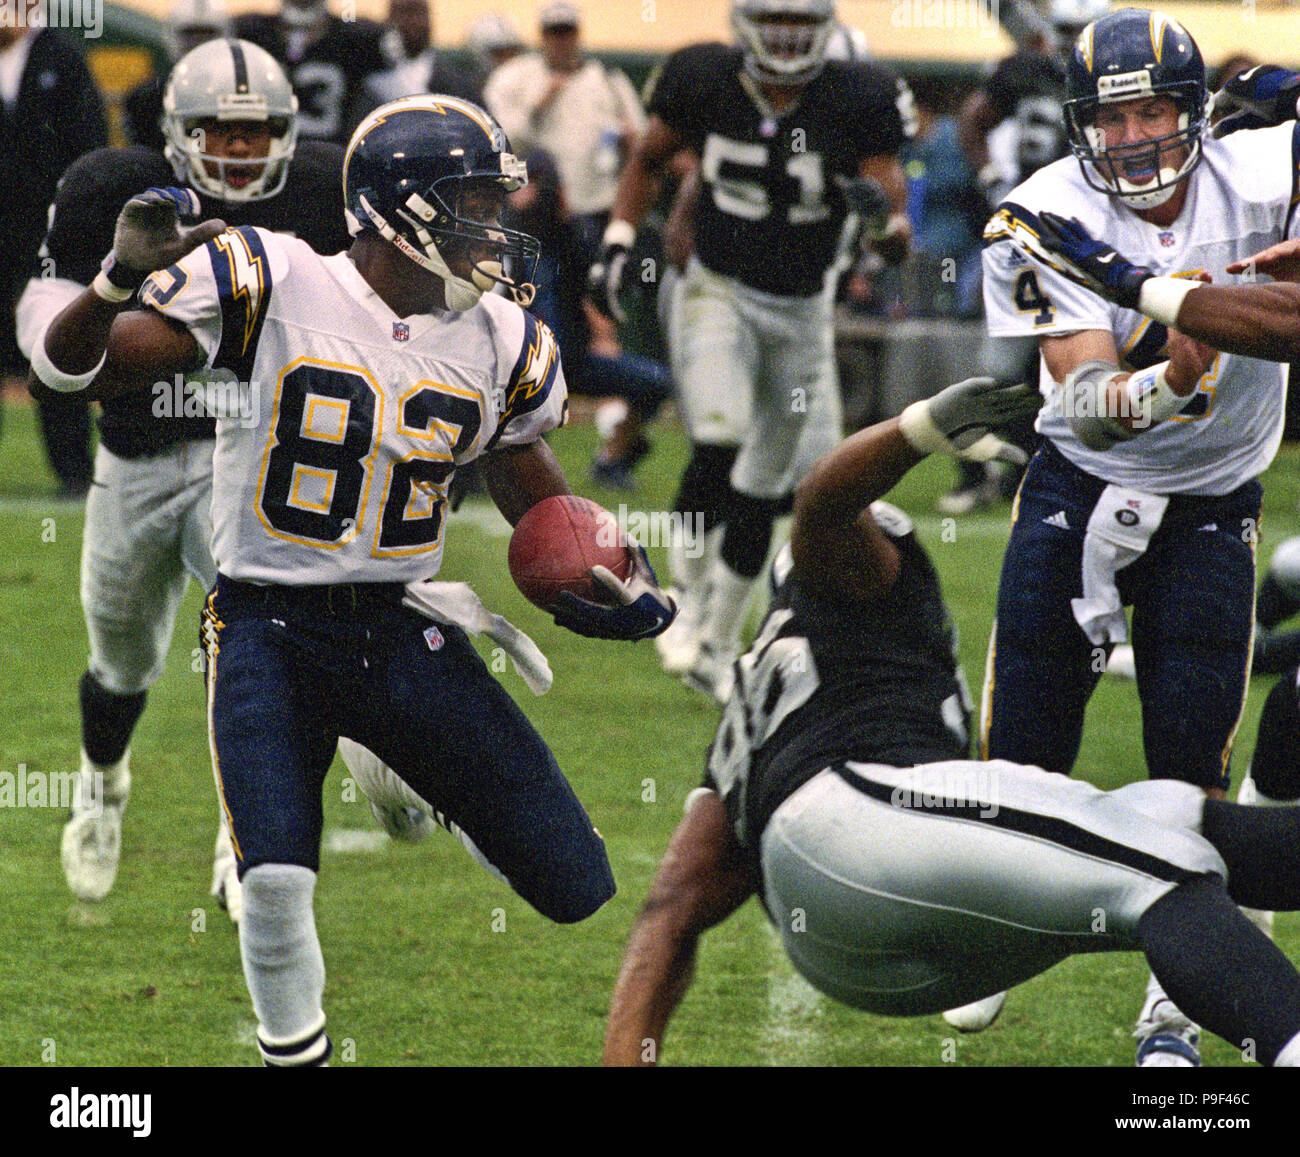 November 14, 1999 - Oakland, California, U.S - Oakland Raiders vs. San  Diego Chargers at Oakland Alameda County Coliseum Sunday, November 14,  1999. Raiders beat Chargers 28-9. San Diego Chargers wide receiver